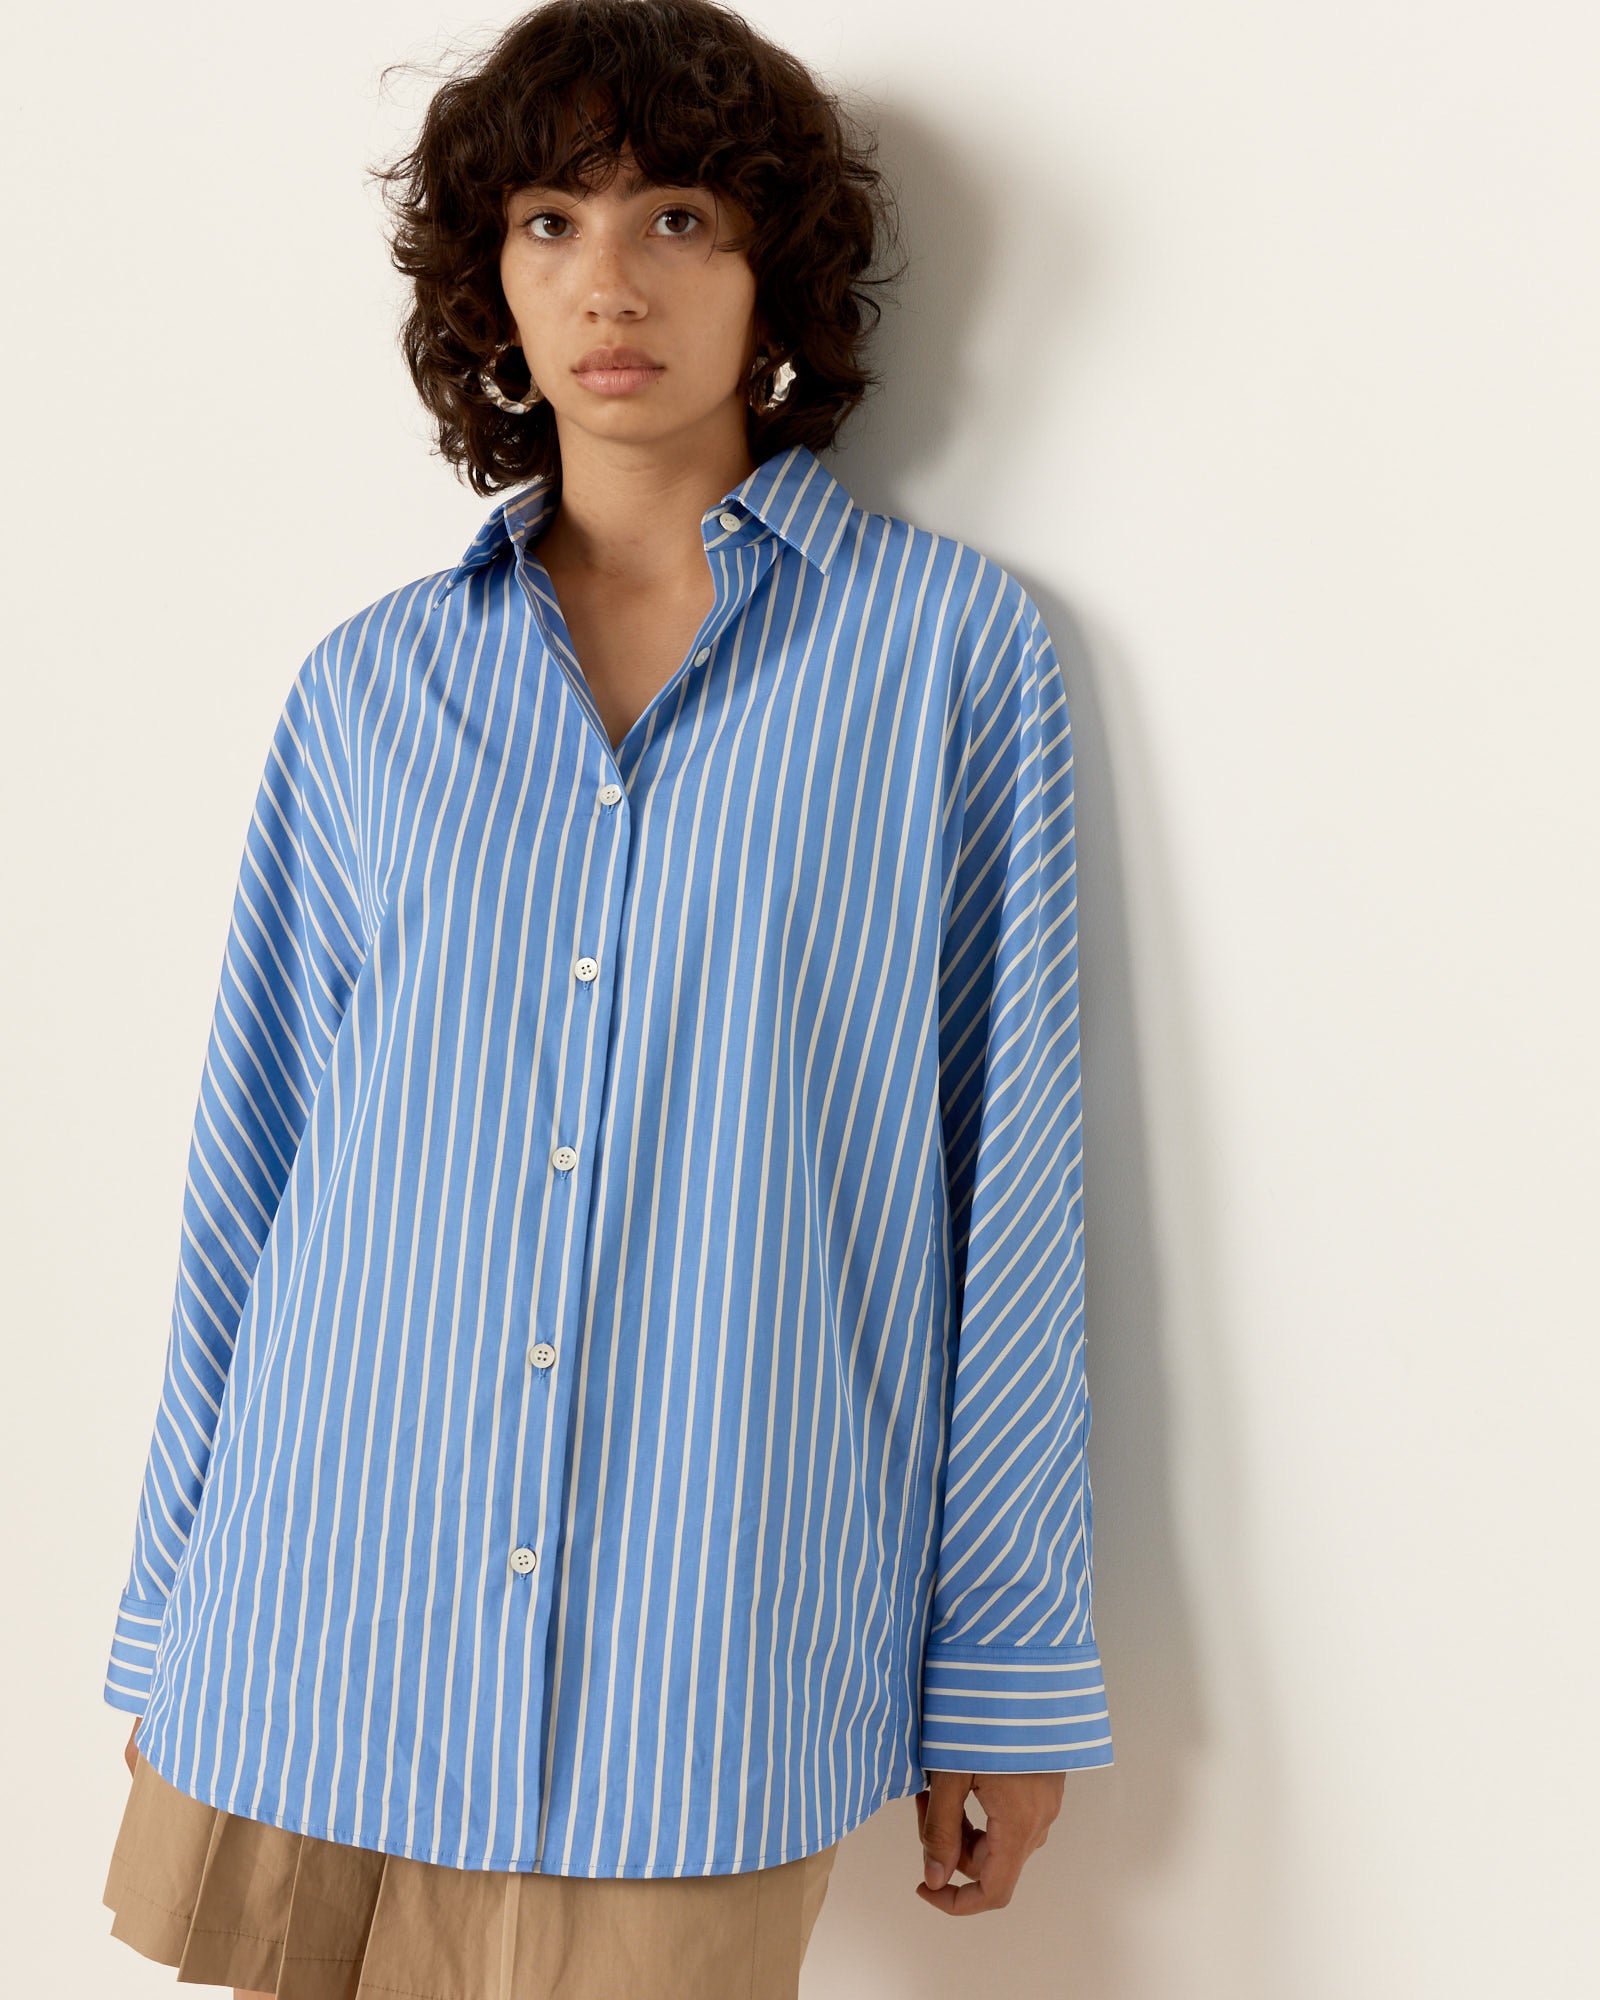 Cocoon Shirt in Light Blue